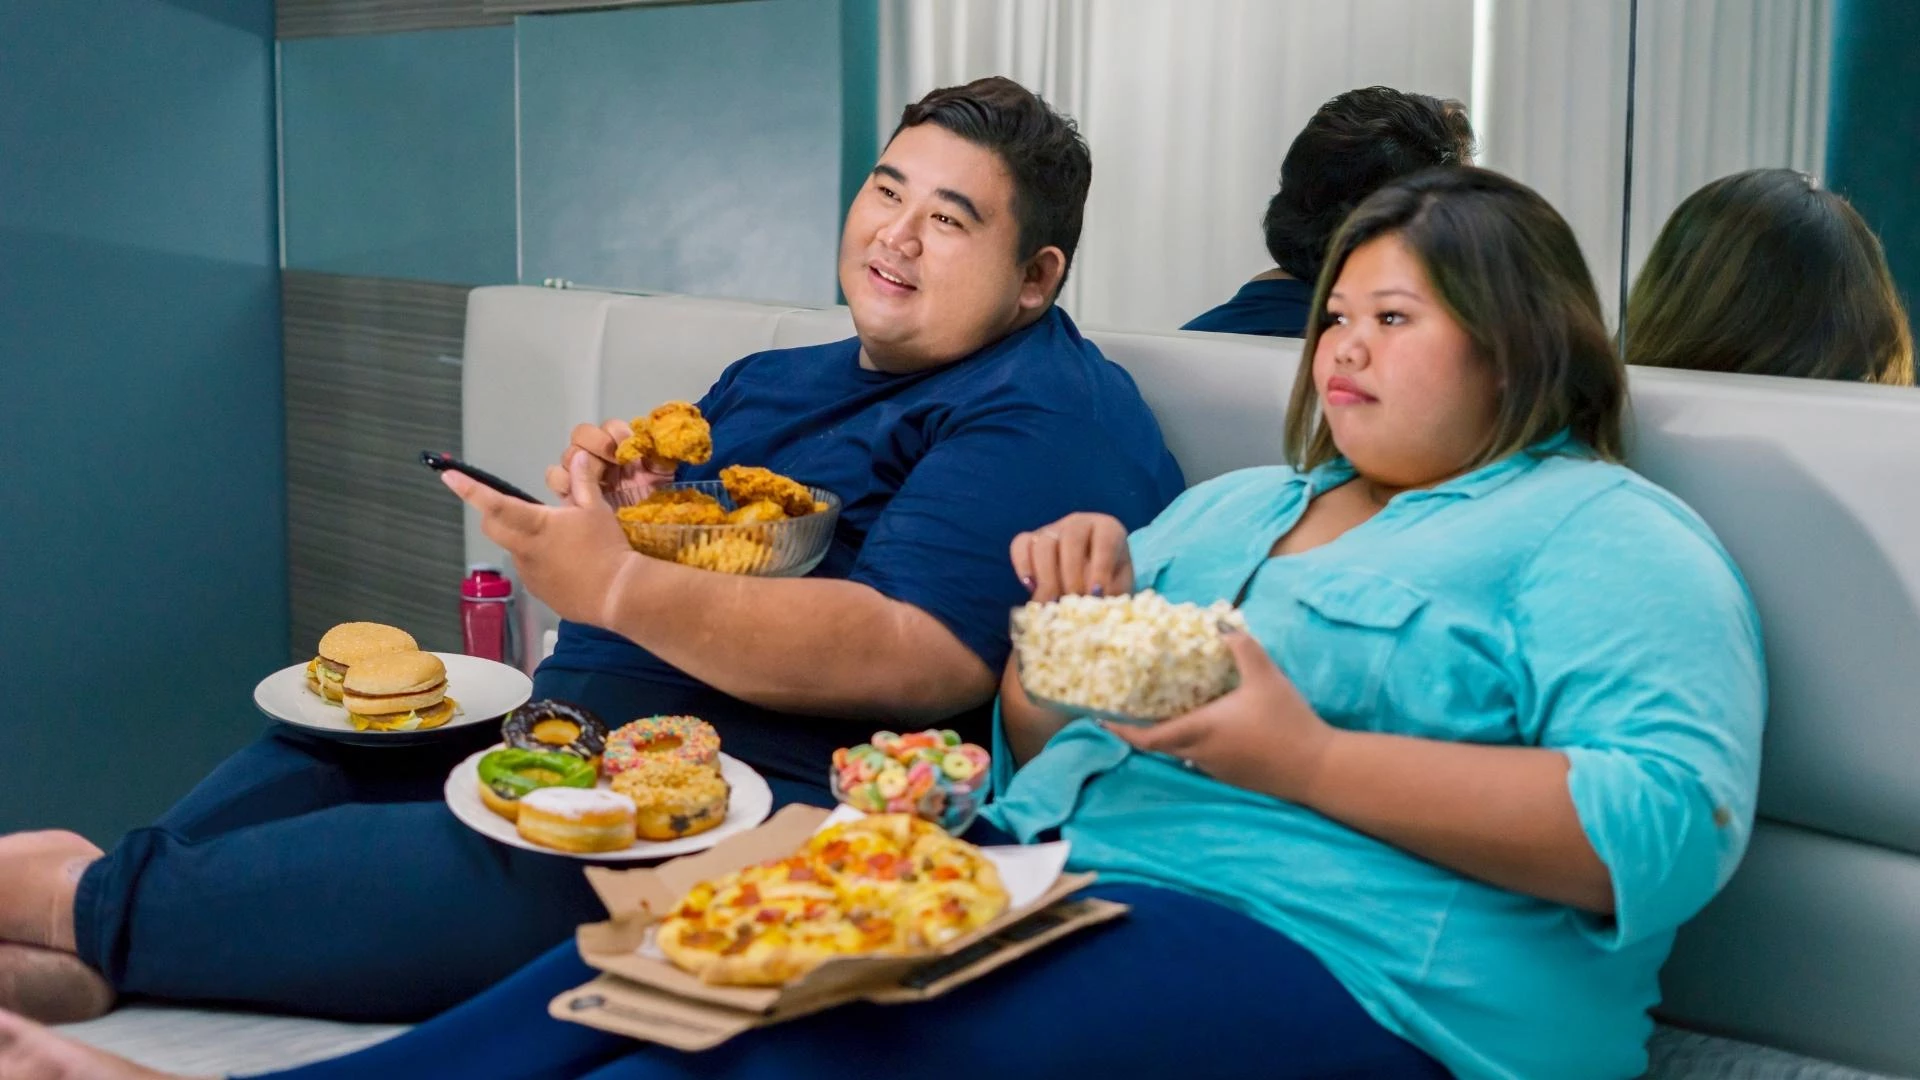 What Is the Risk of Stroke in Young People with Obesity and Preventive Tips?